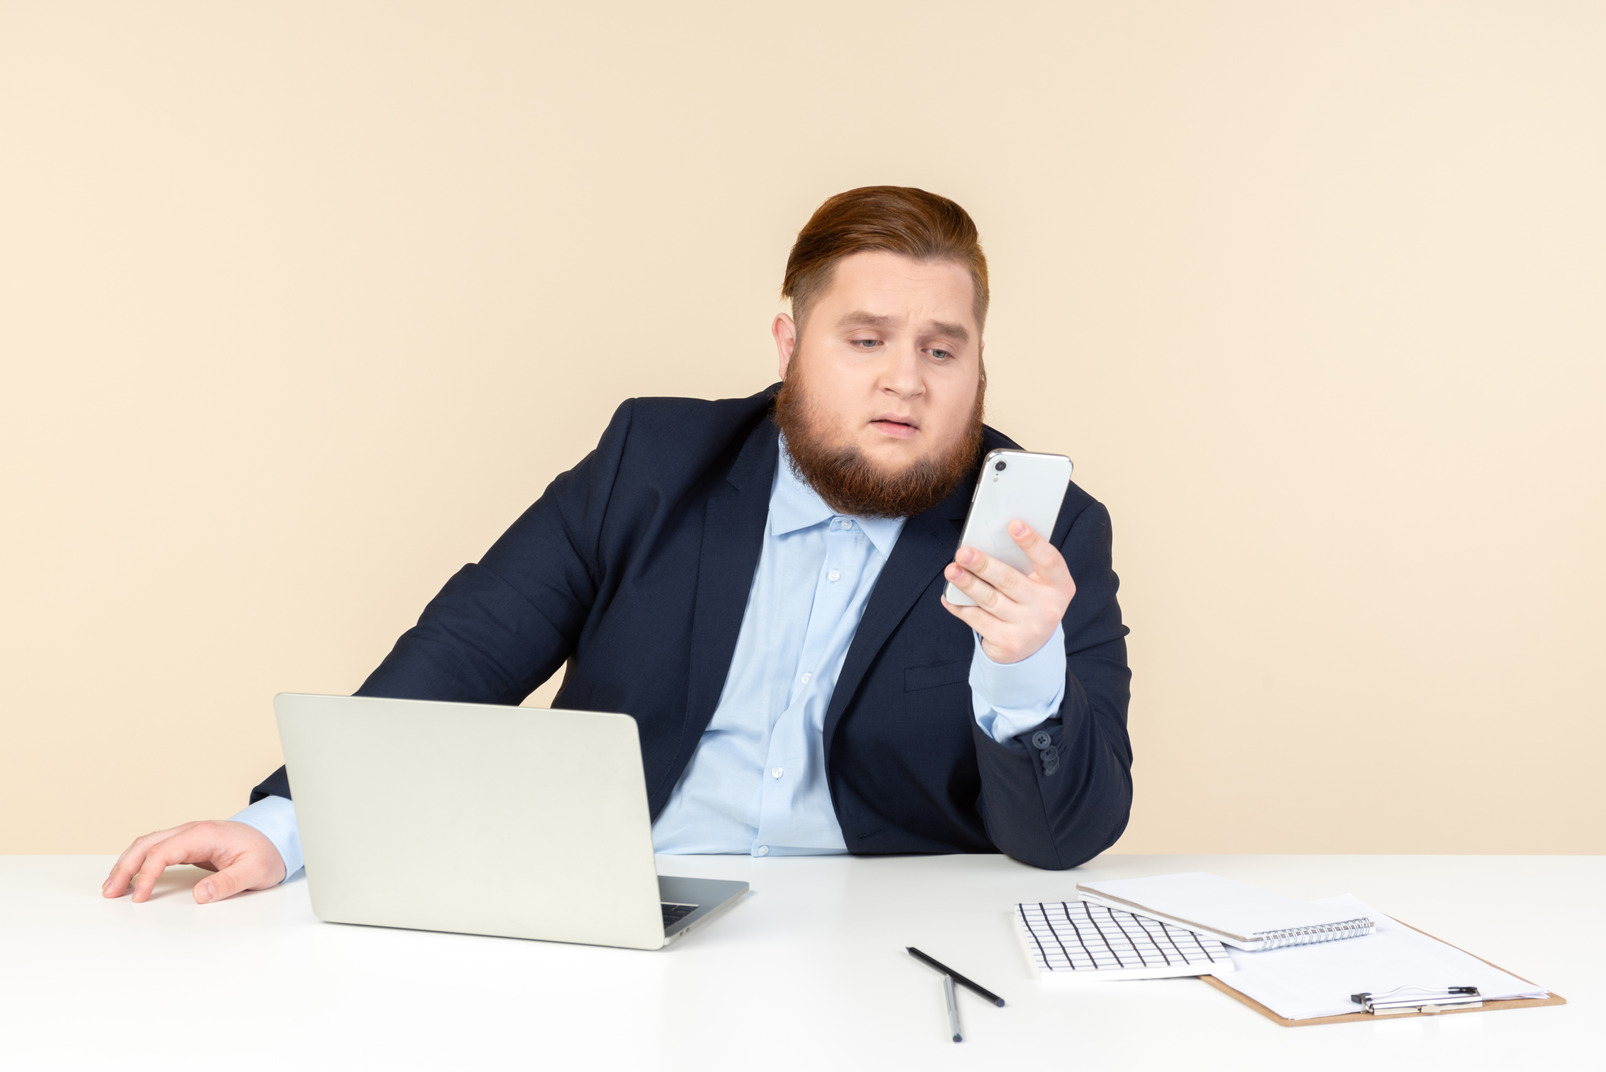 Pensive young overweight man sitting at the office desk and holding phone